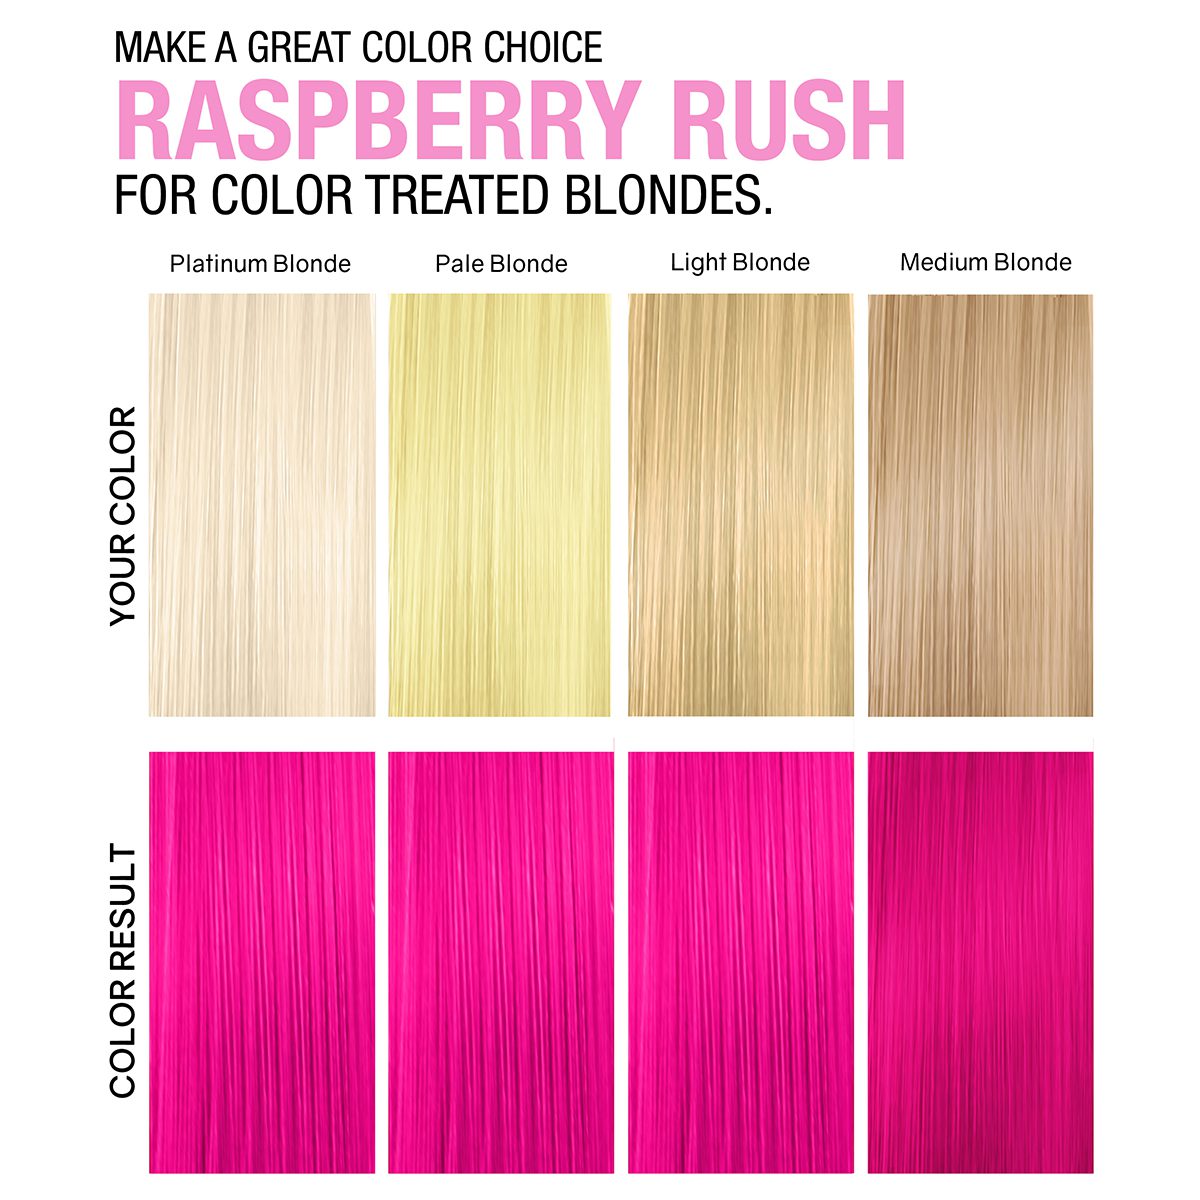 Raspberry Rush for color treated blondes.